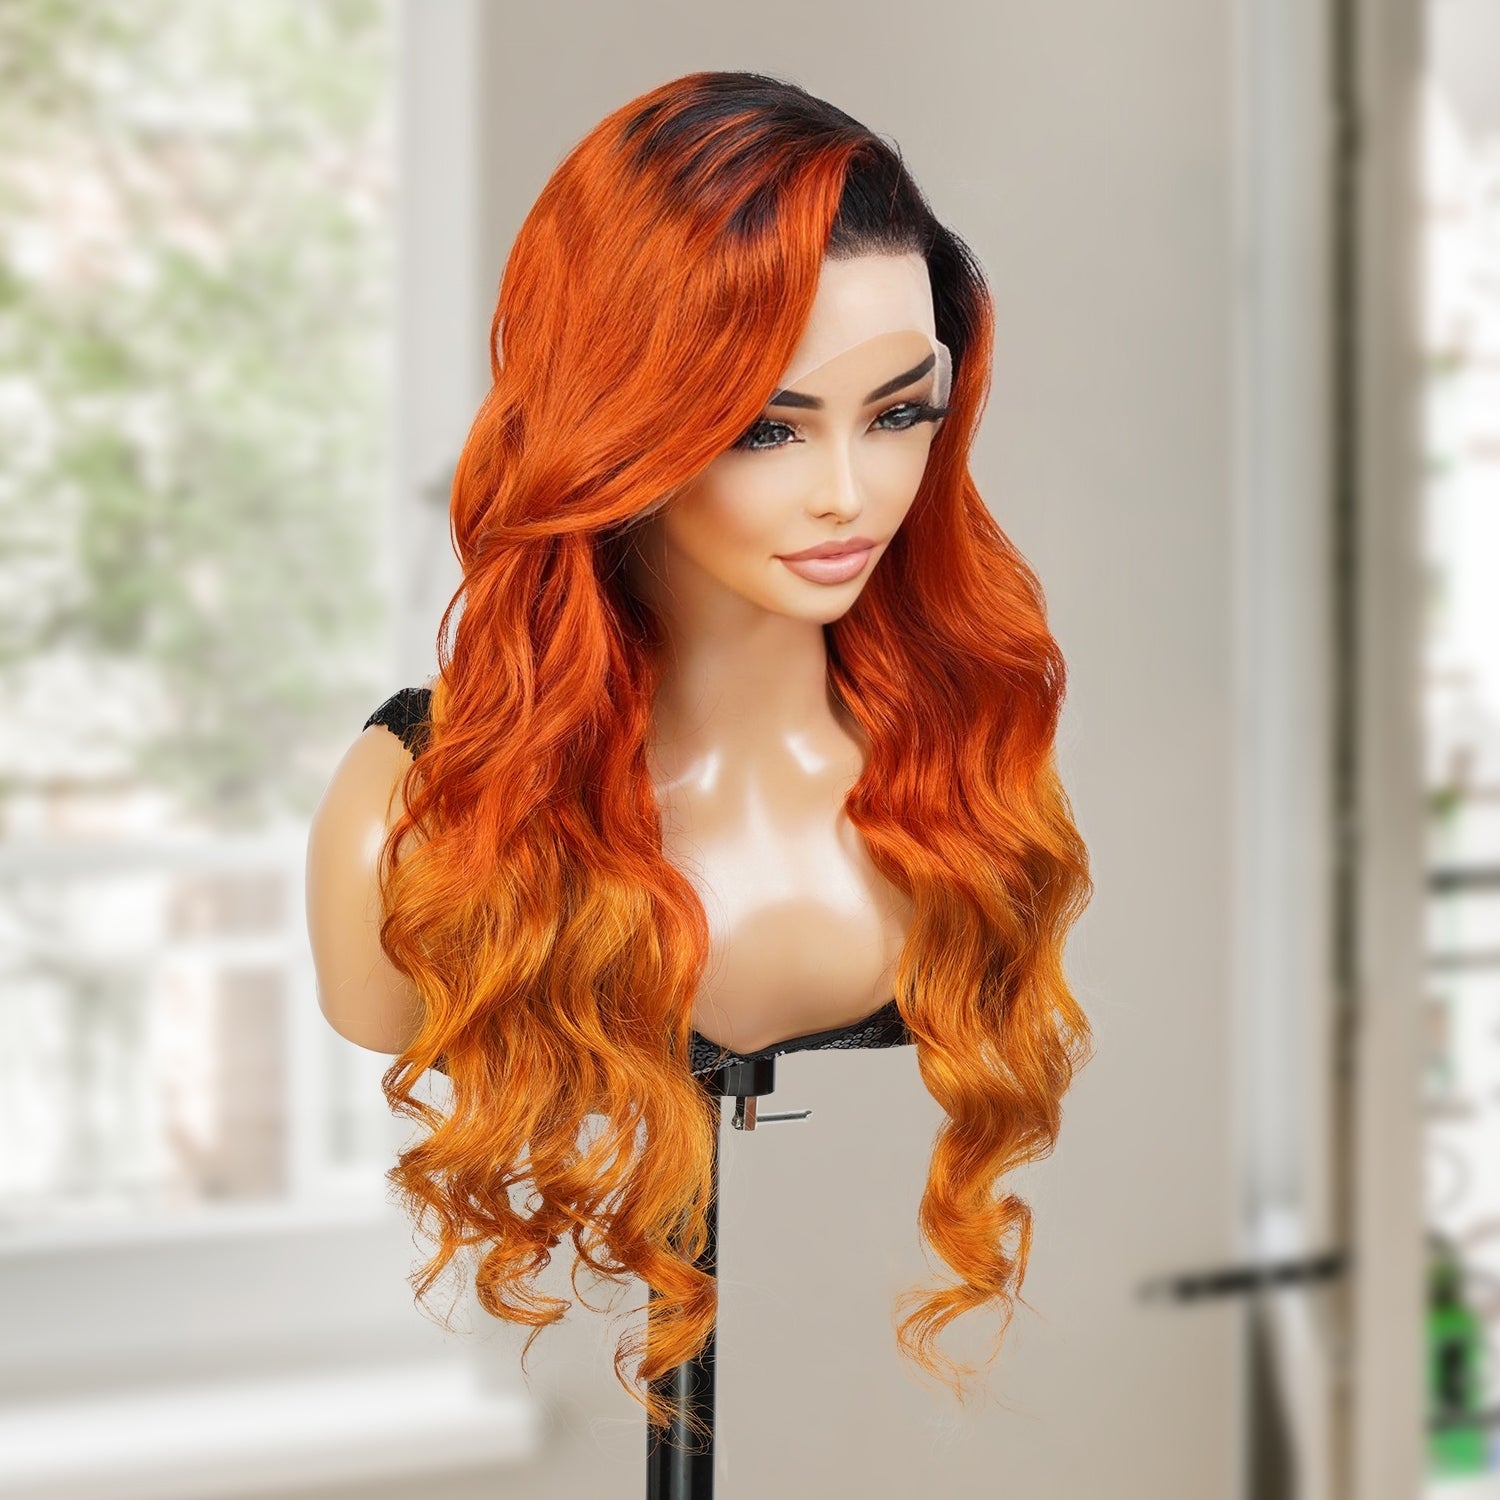 UpScale 100% Human Hair Glueless 13x4 Lace Frontal Wig Red Orange Loose Wave 24"